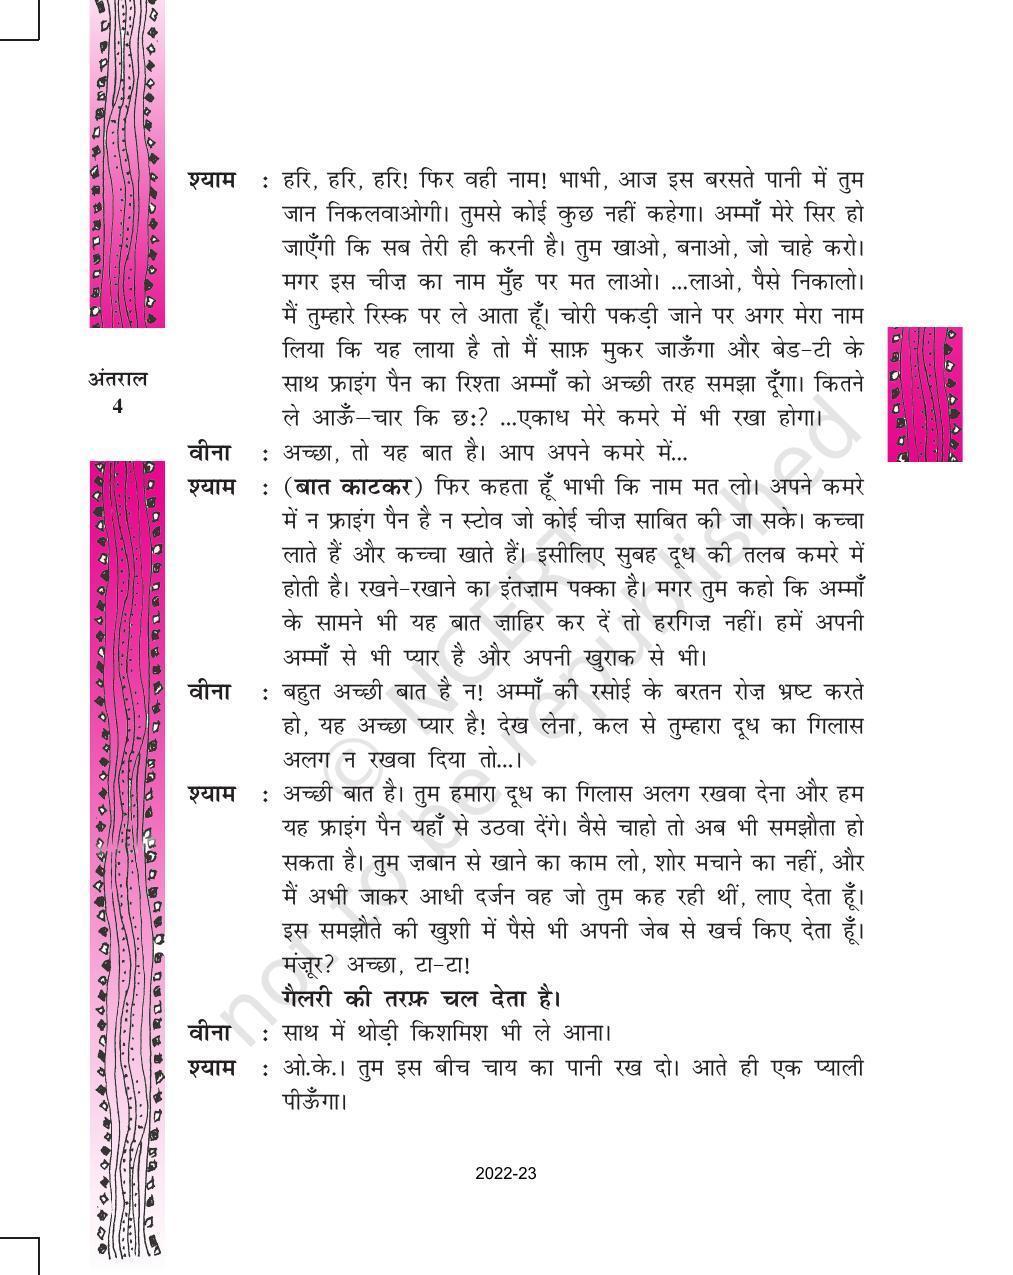 NCERT Book for Class 11 Hindi Antral Chapter 1 अंडे के छिलके - Page 4